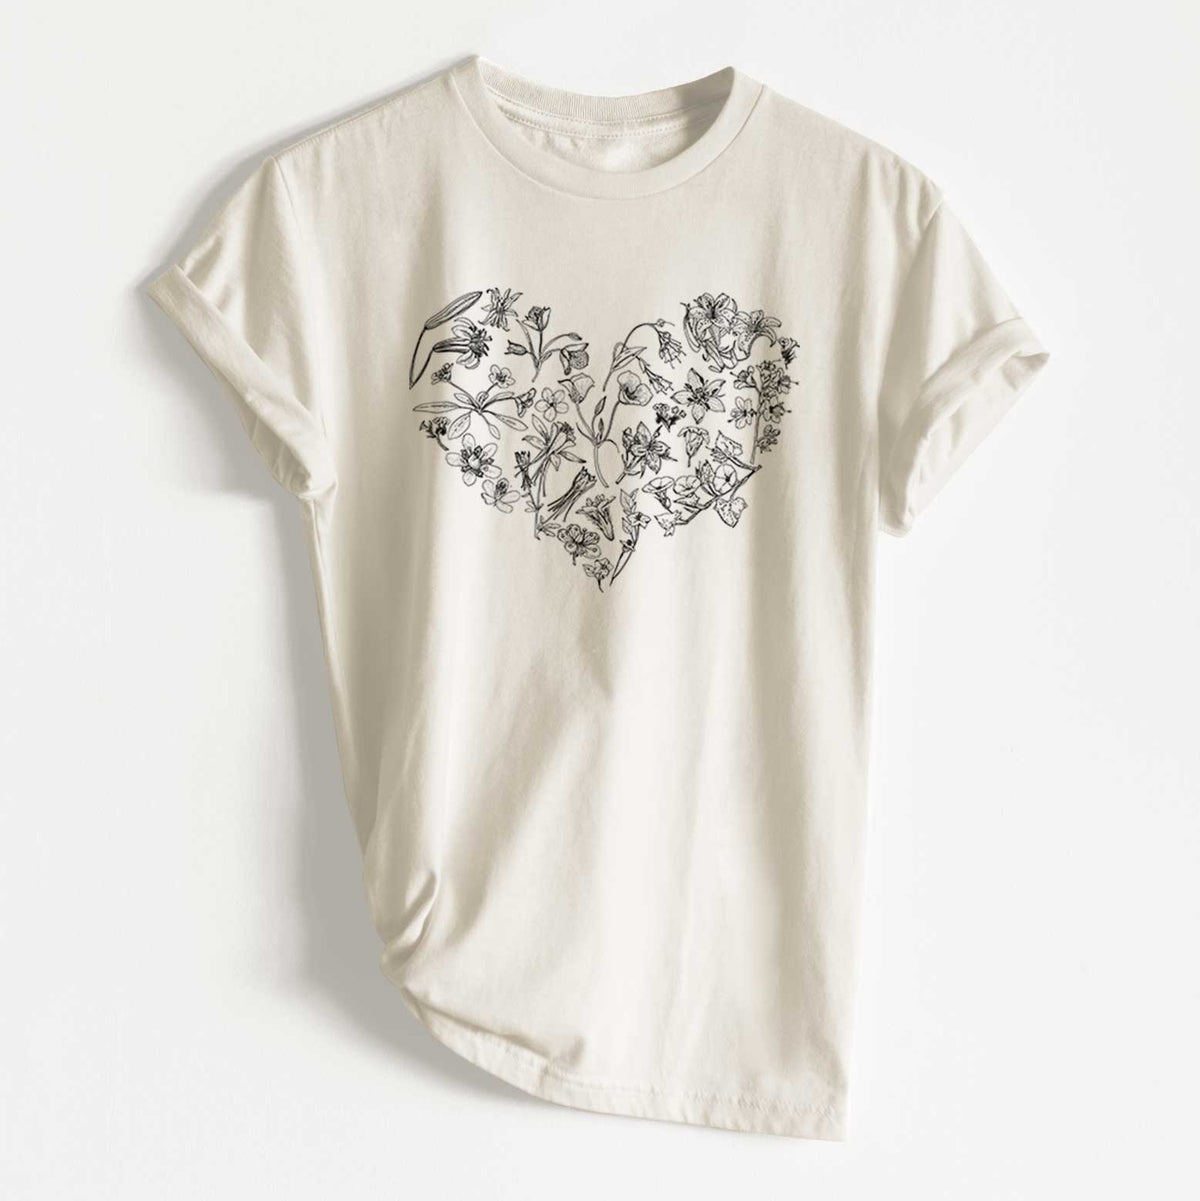 Heart Full of California Mountain Wildflowers - Unisex Recycled Eco Tee  - CLOSEOUT - FINAL SALE